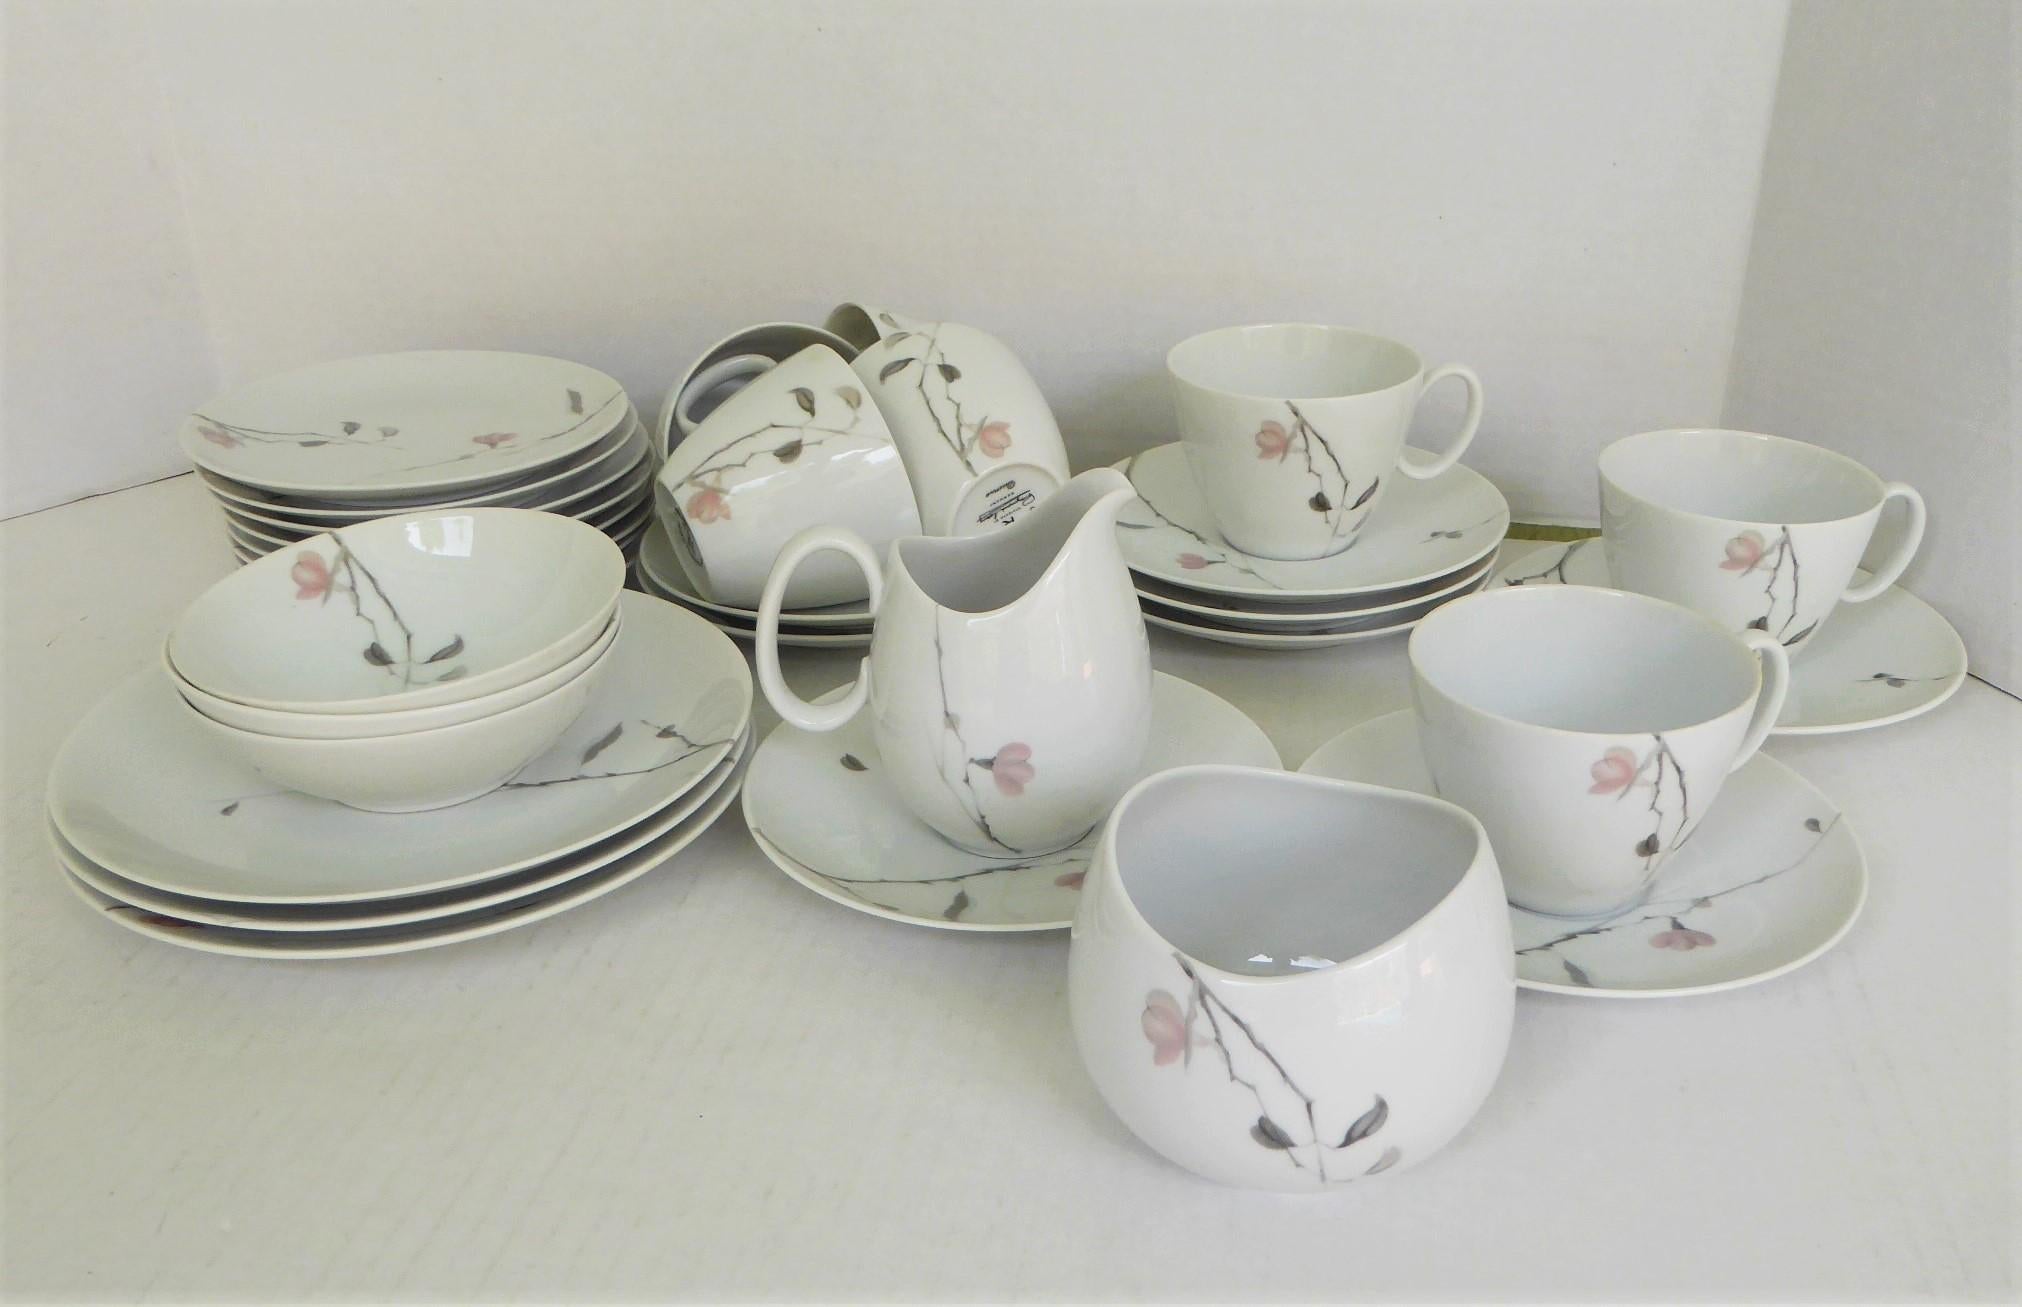 A 1950s Continental China porcelain coffee breakfast service of 36 pieces from Rosenthal, the German porcelain maker. Designed by Raymond Loewy and in production from 1956 through 1964. Mid-Century Modern depiction of flowering Quince tree branches